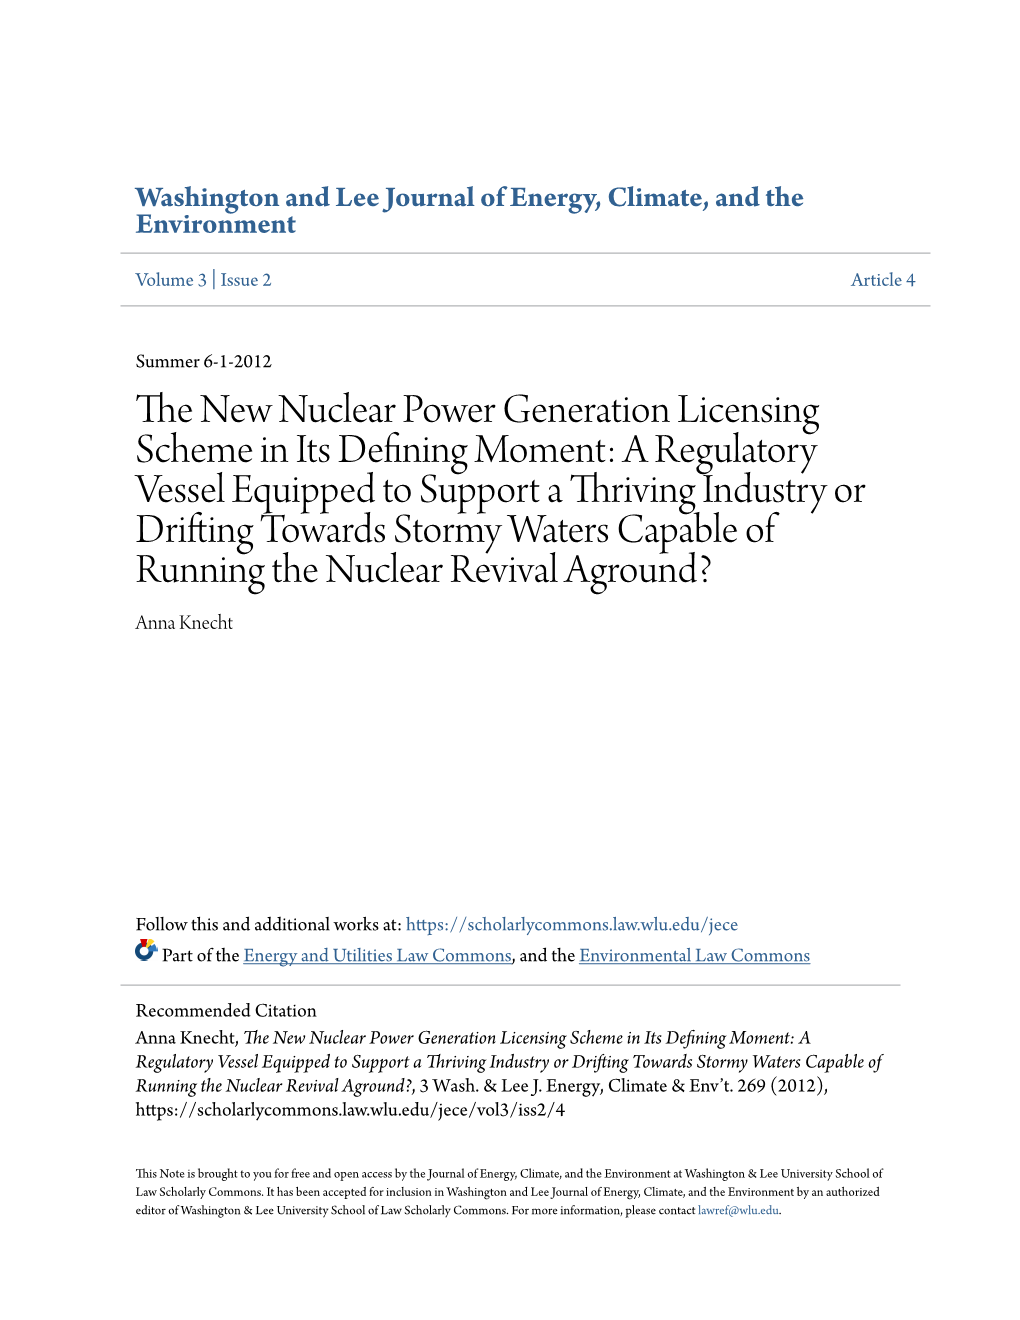 The New Nuclear Power Generation Licensing Scheme in Its Defining